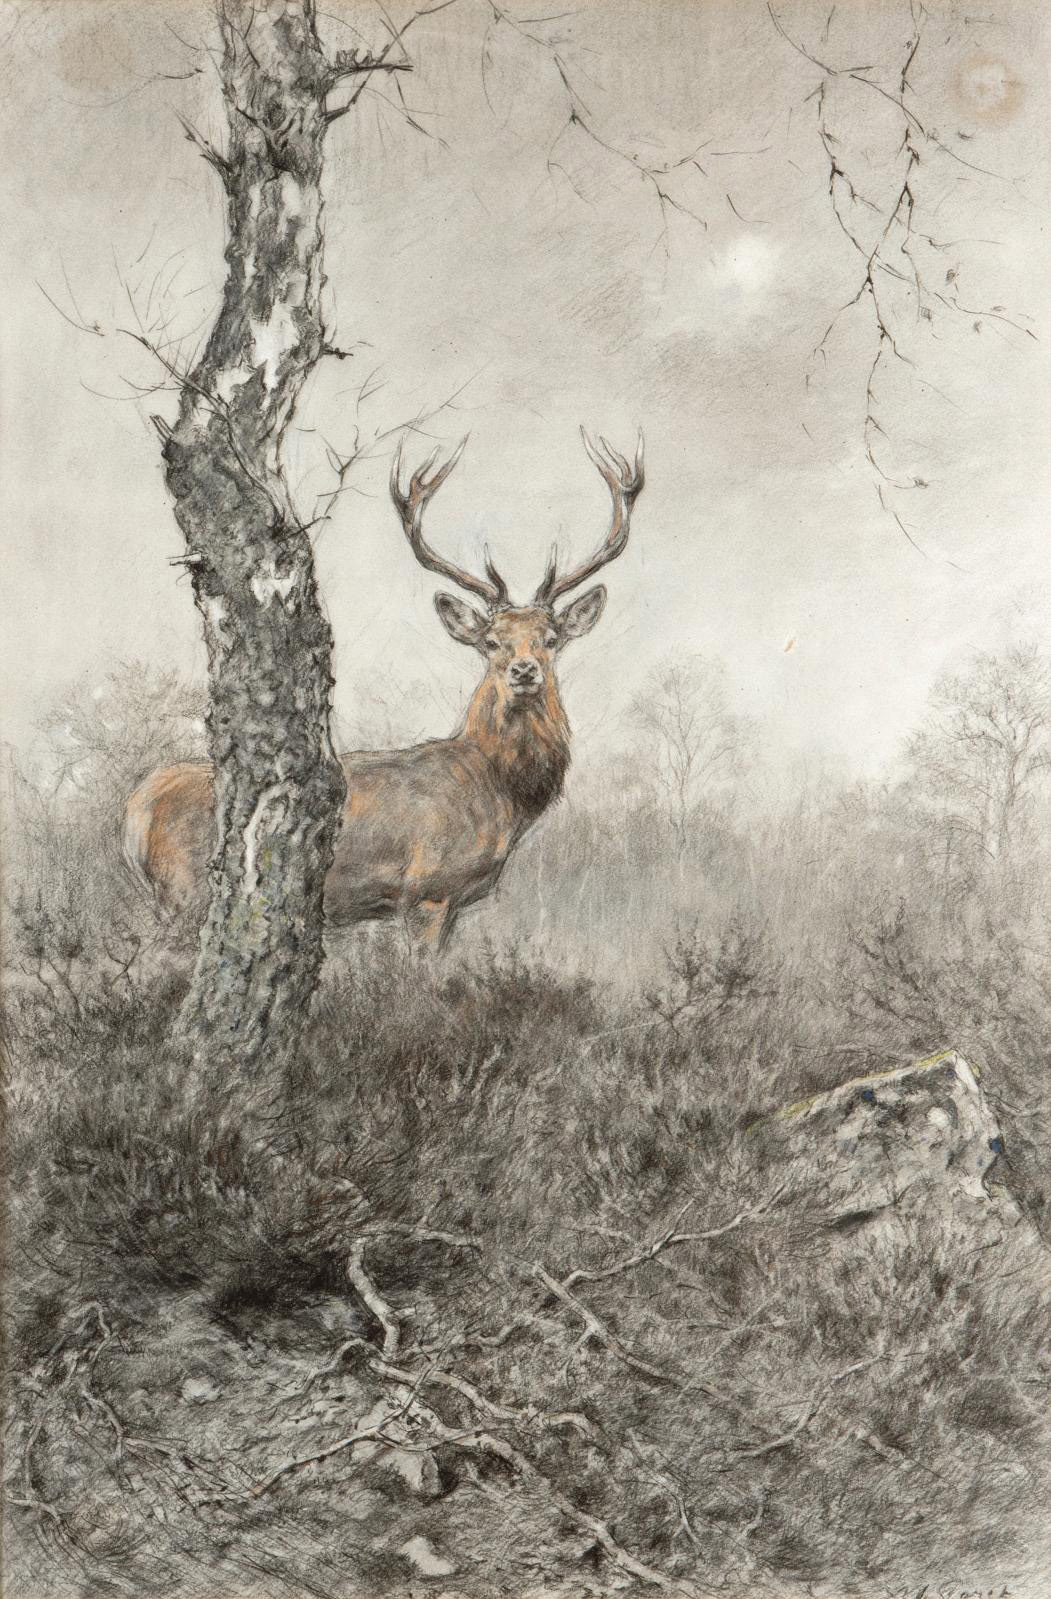 The Vuitton Collection: The Majestic Art of Hunting